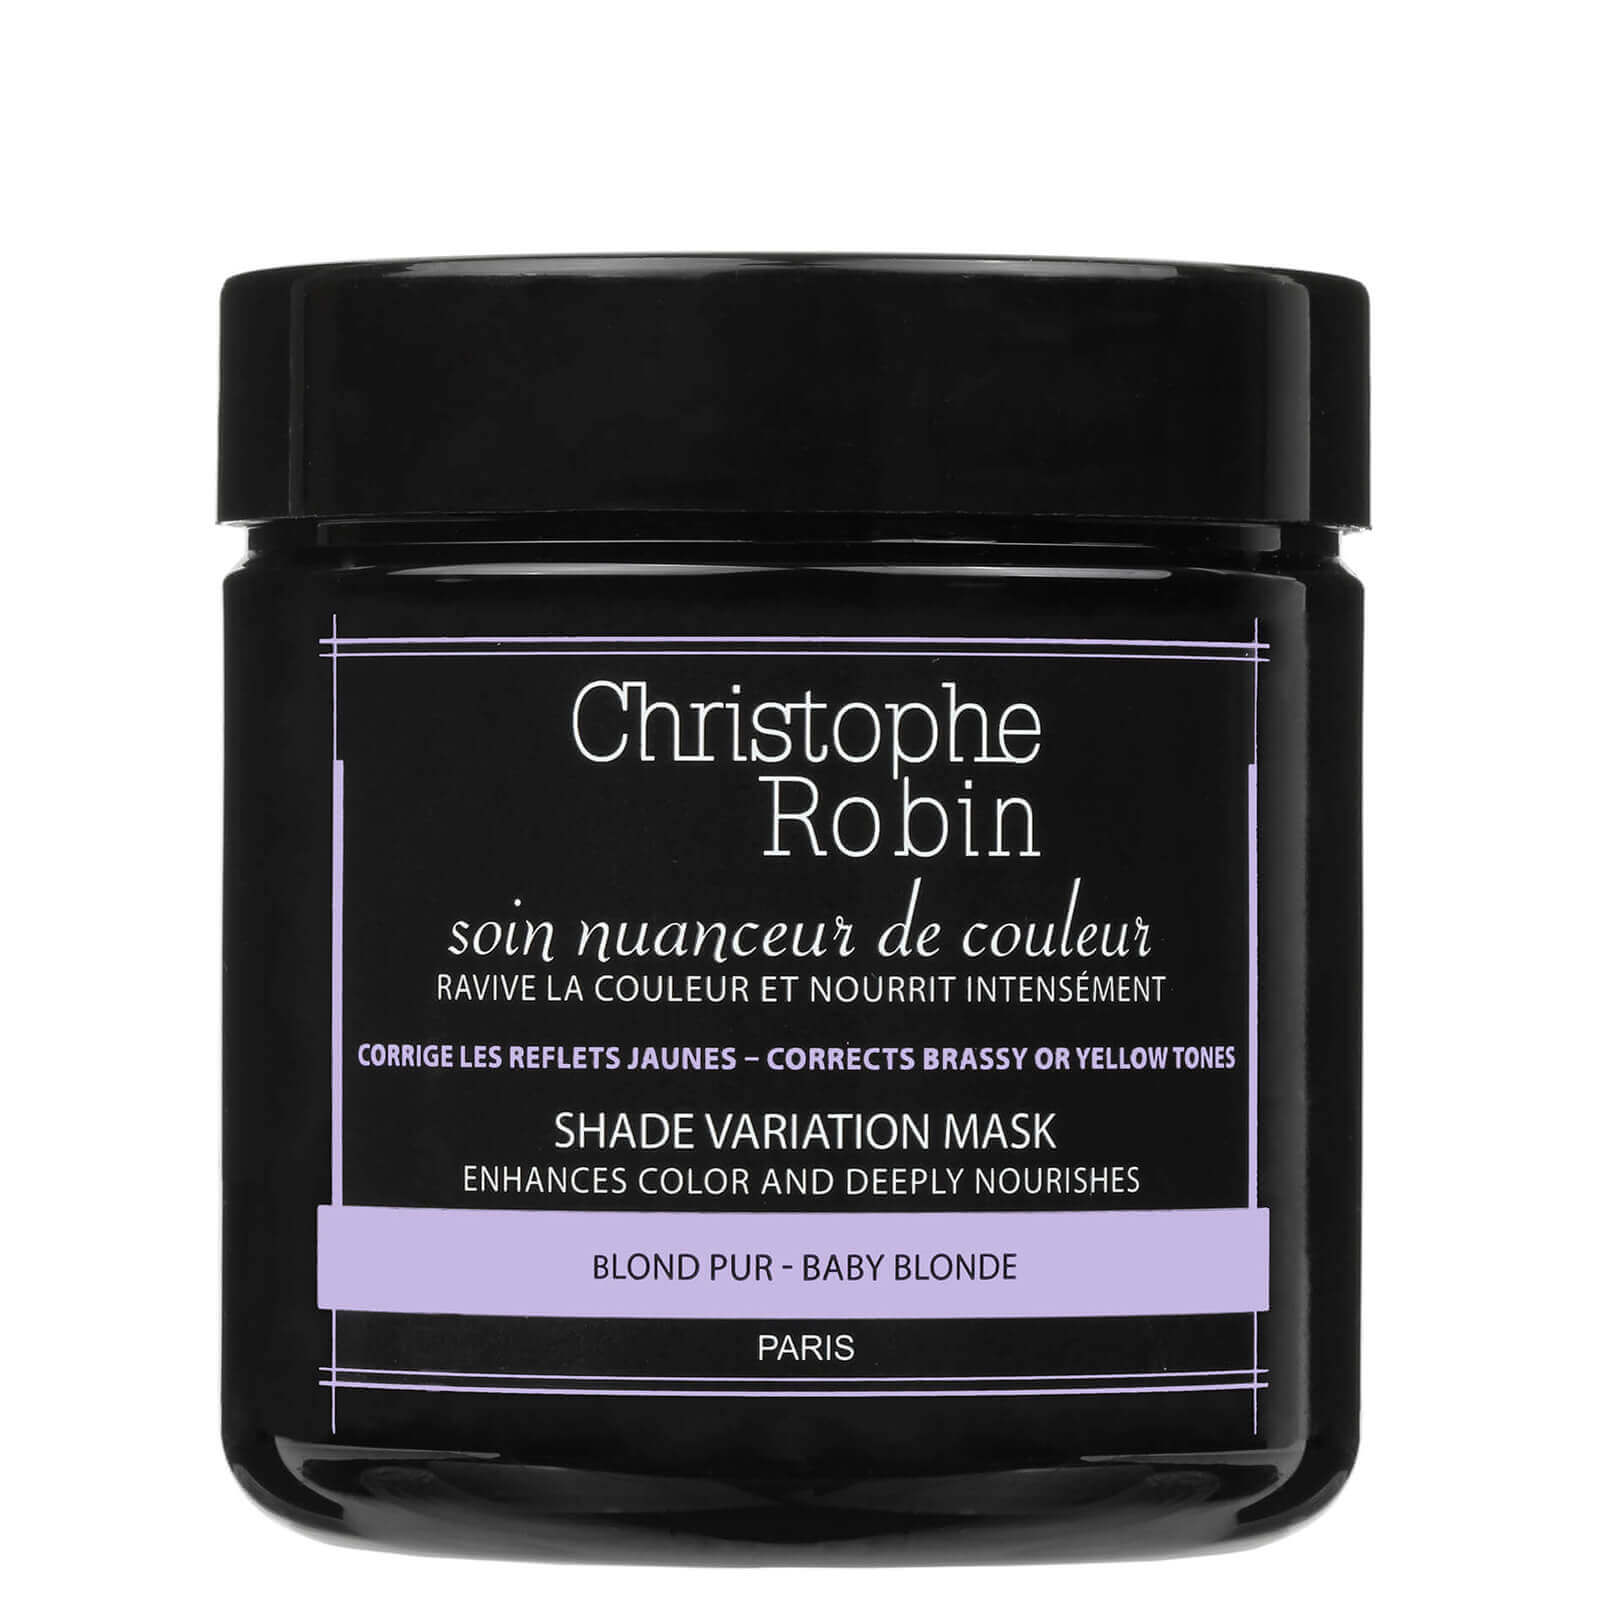 This is by far the best purple mask I've ever used. Not only does it keep my blonde incredibly bright, it's deeply nourishing, reparative, and hydrating. A must for bottle blondes!